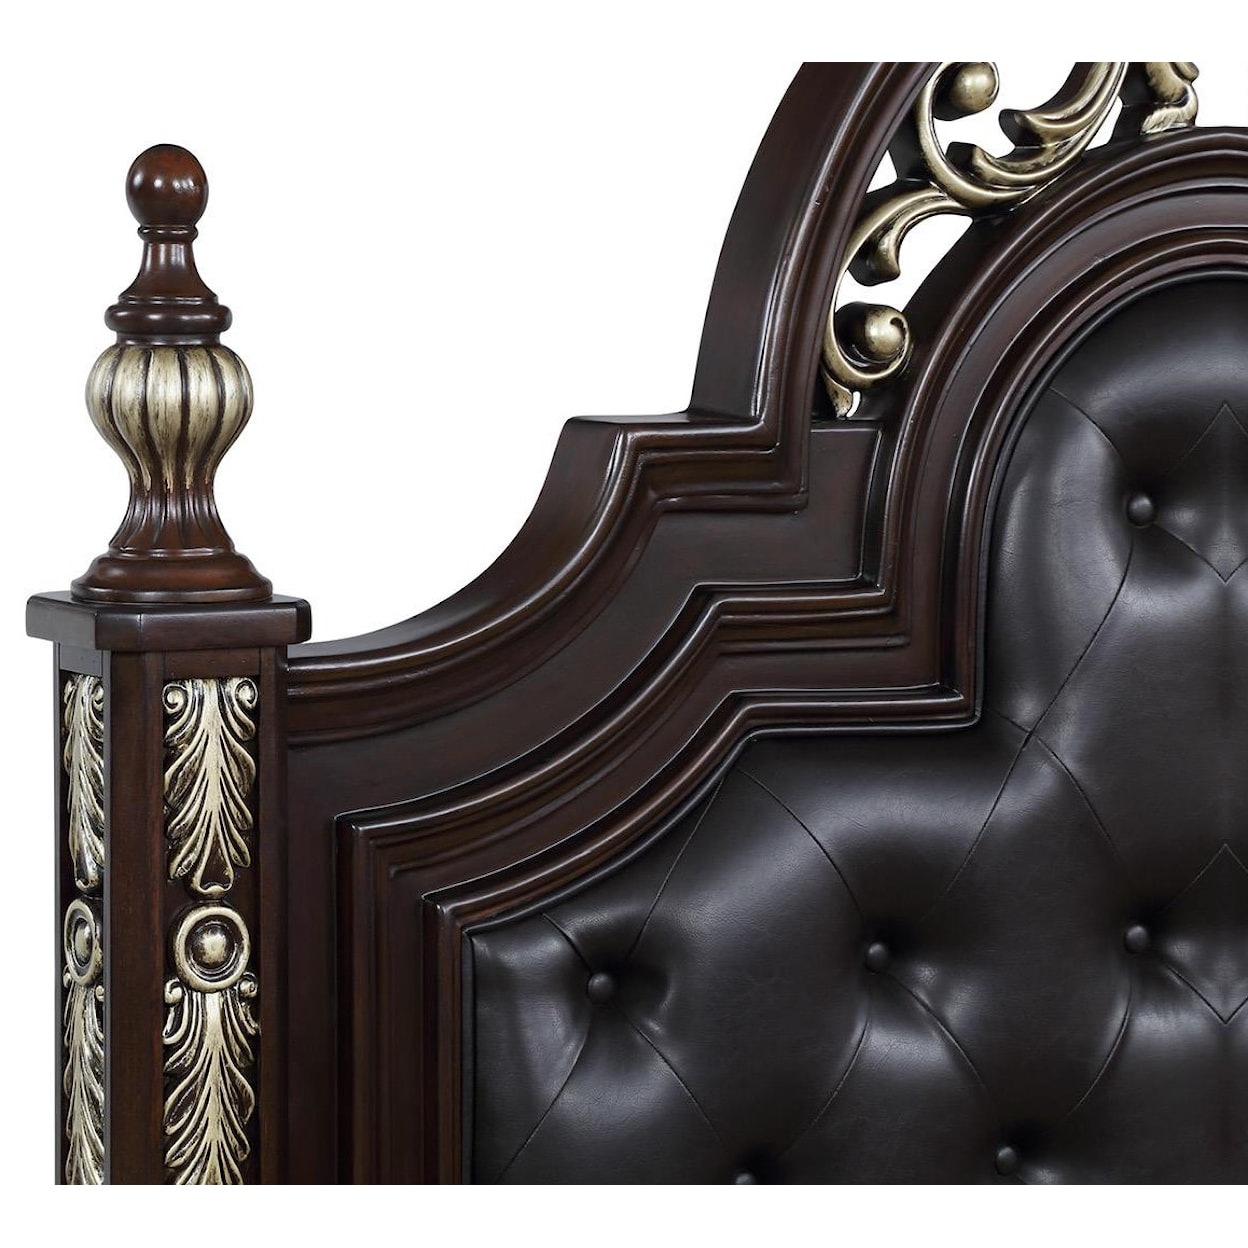 New Classic Maximus King Poster Bed with Upholstered Headboard